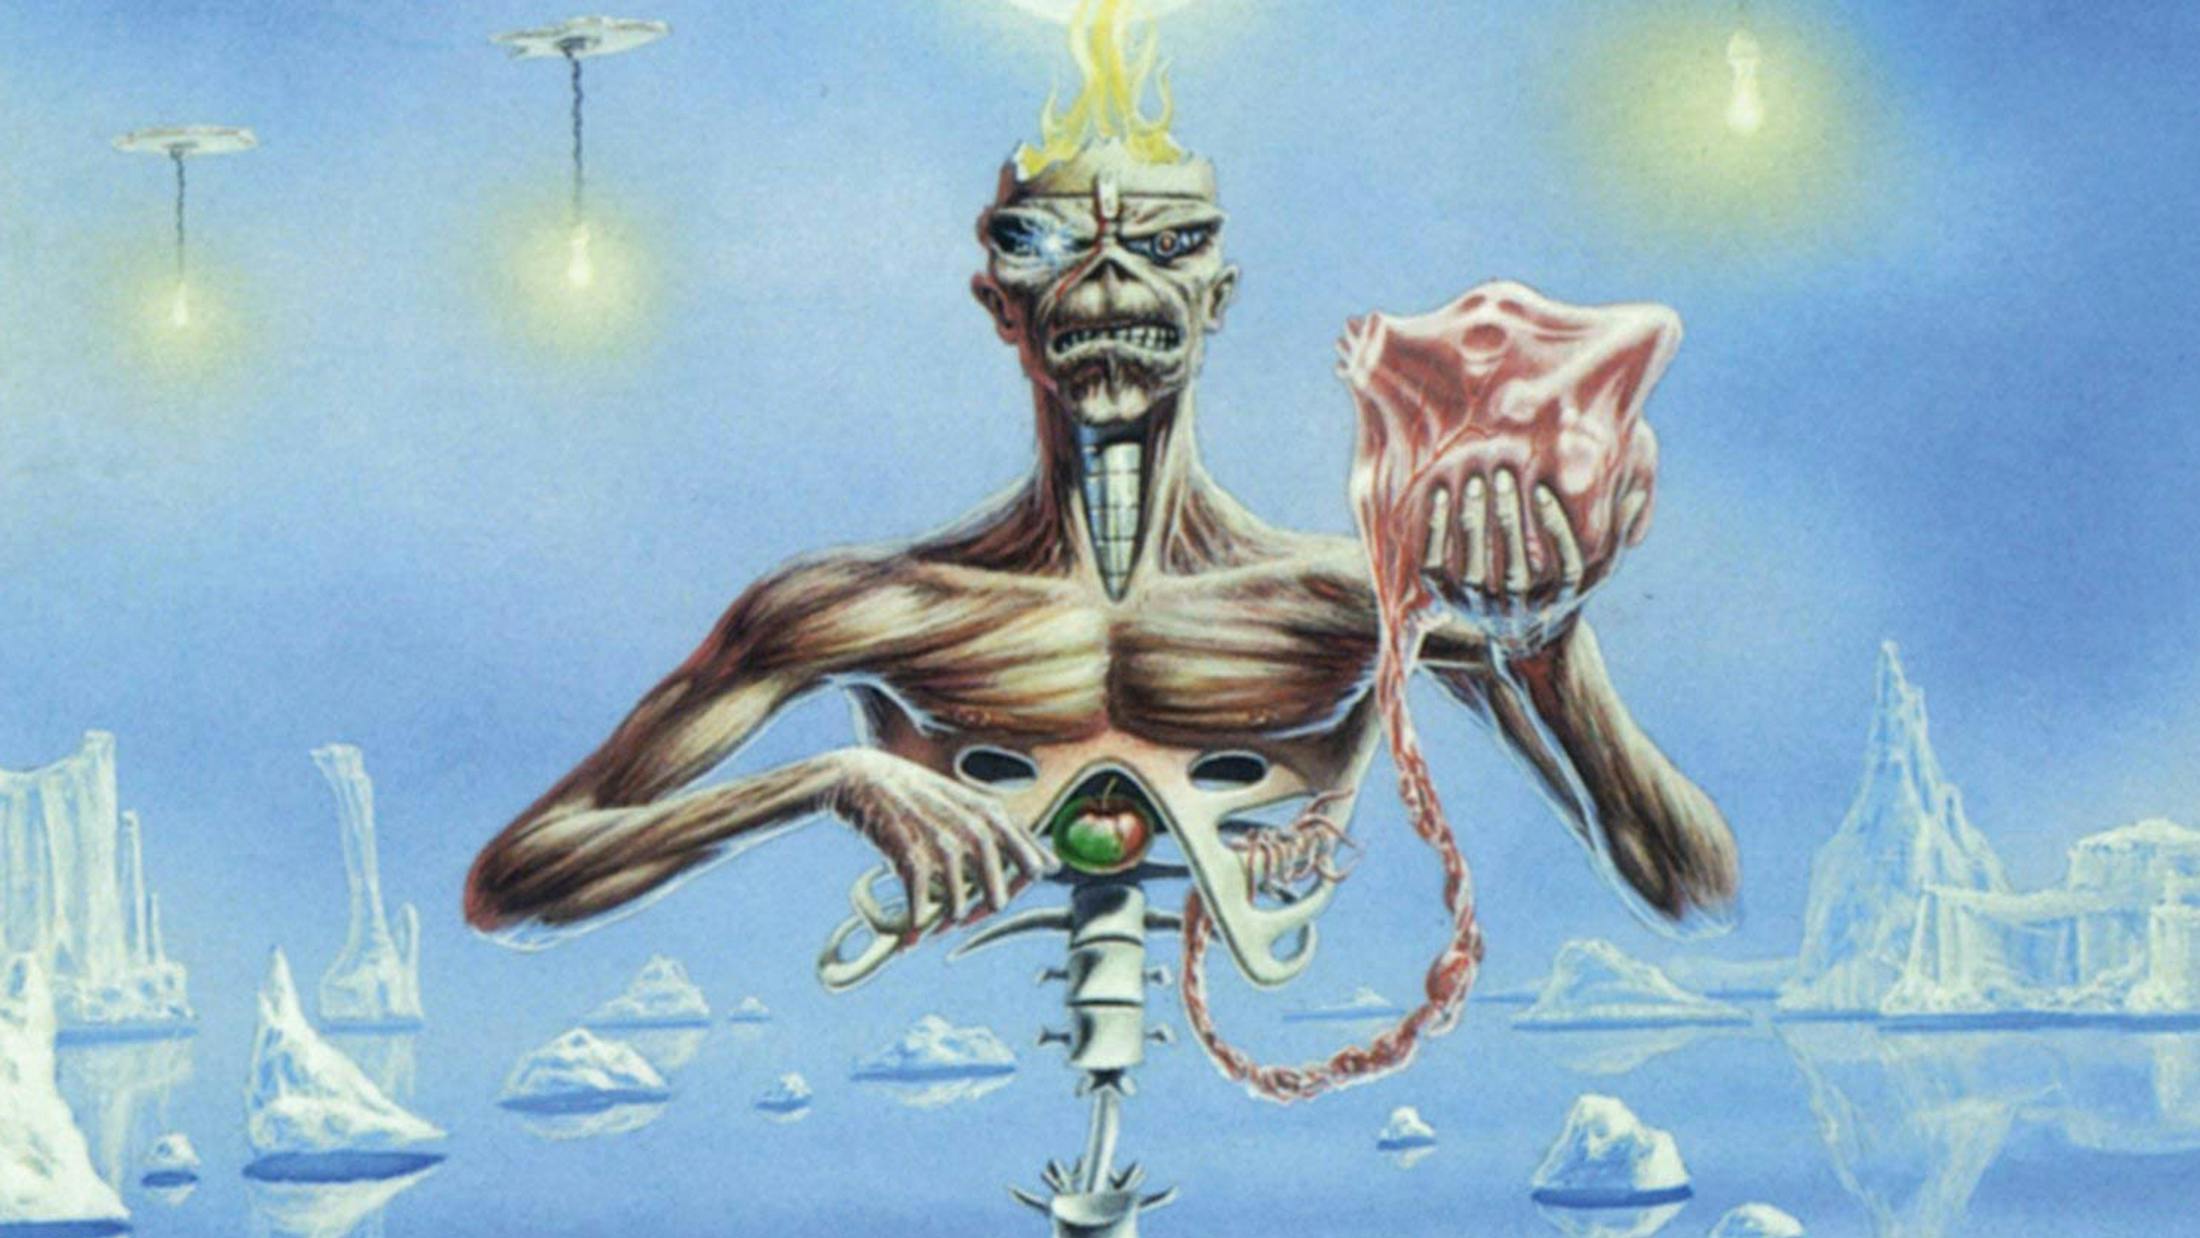 Iron Maiden’s Seventh Son Of A Seventh Son remains an unimpeachably perfect album